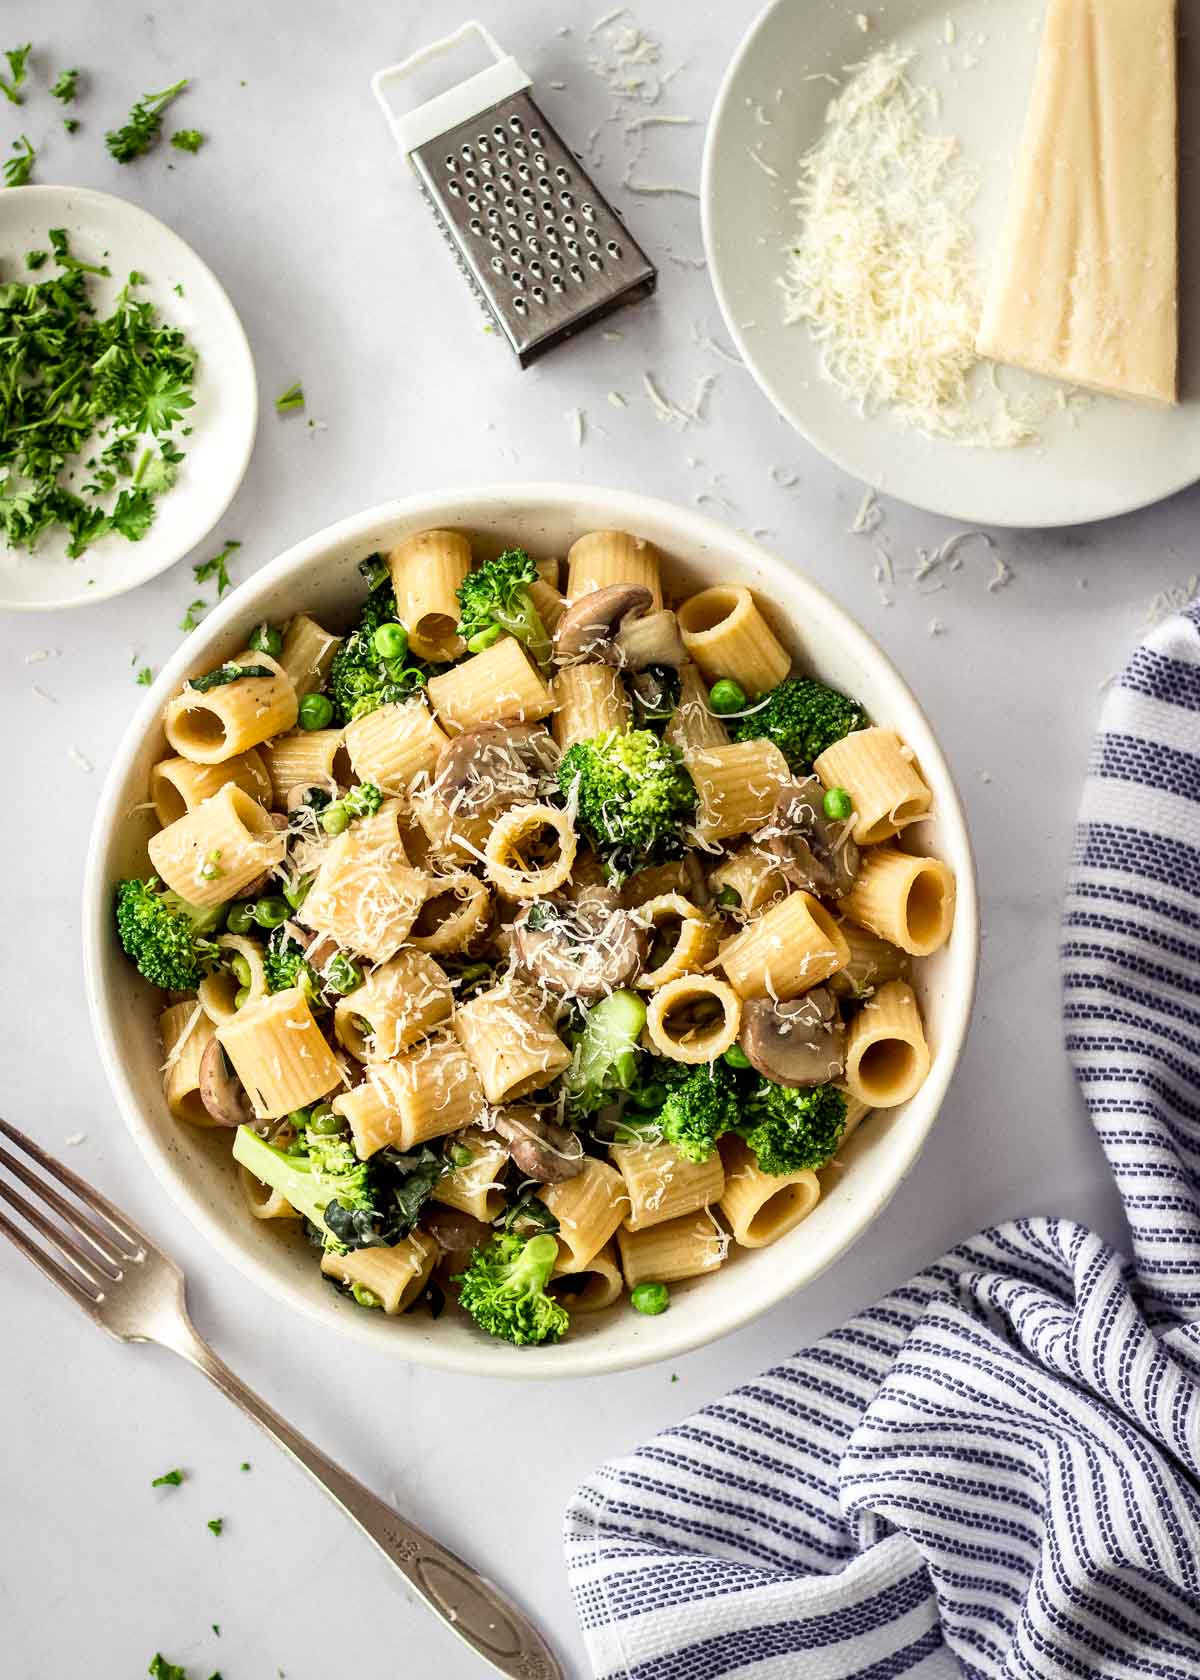 Overhead shot of bowl of broccoli mushroom pasta surrounded by vegan parmesan block and grater, a dish of parsley, a fork and napkin.